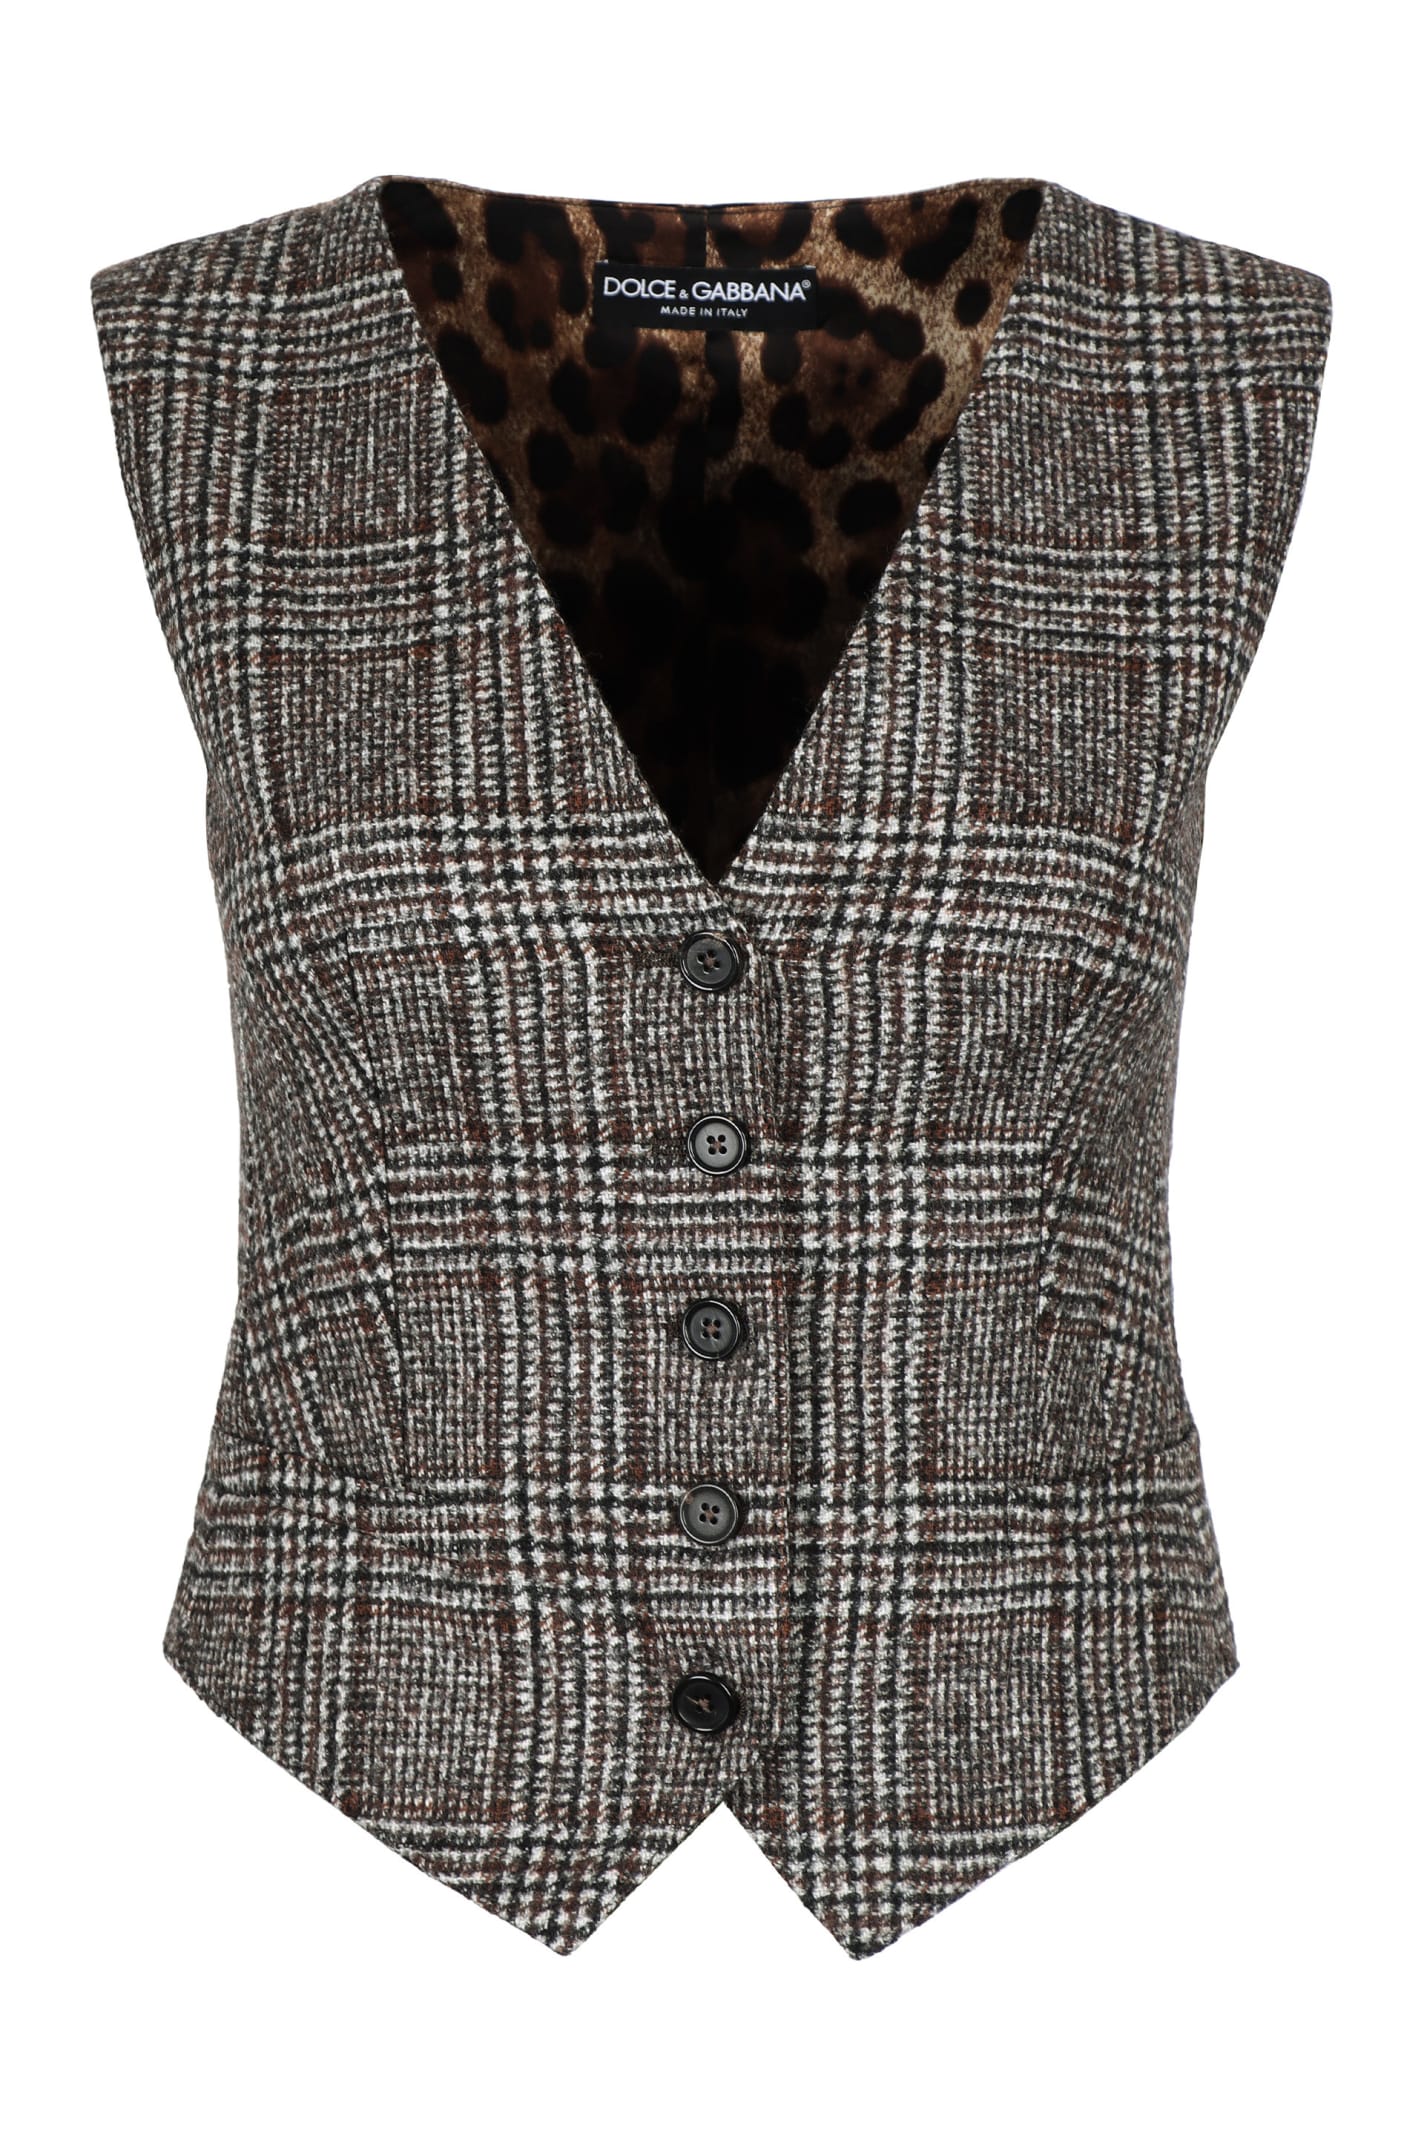 Dolce & Gabbana Checked Single-breasted Vest